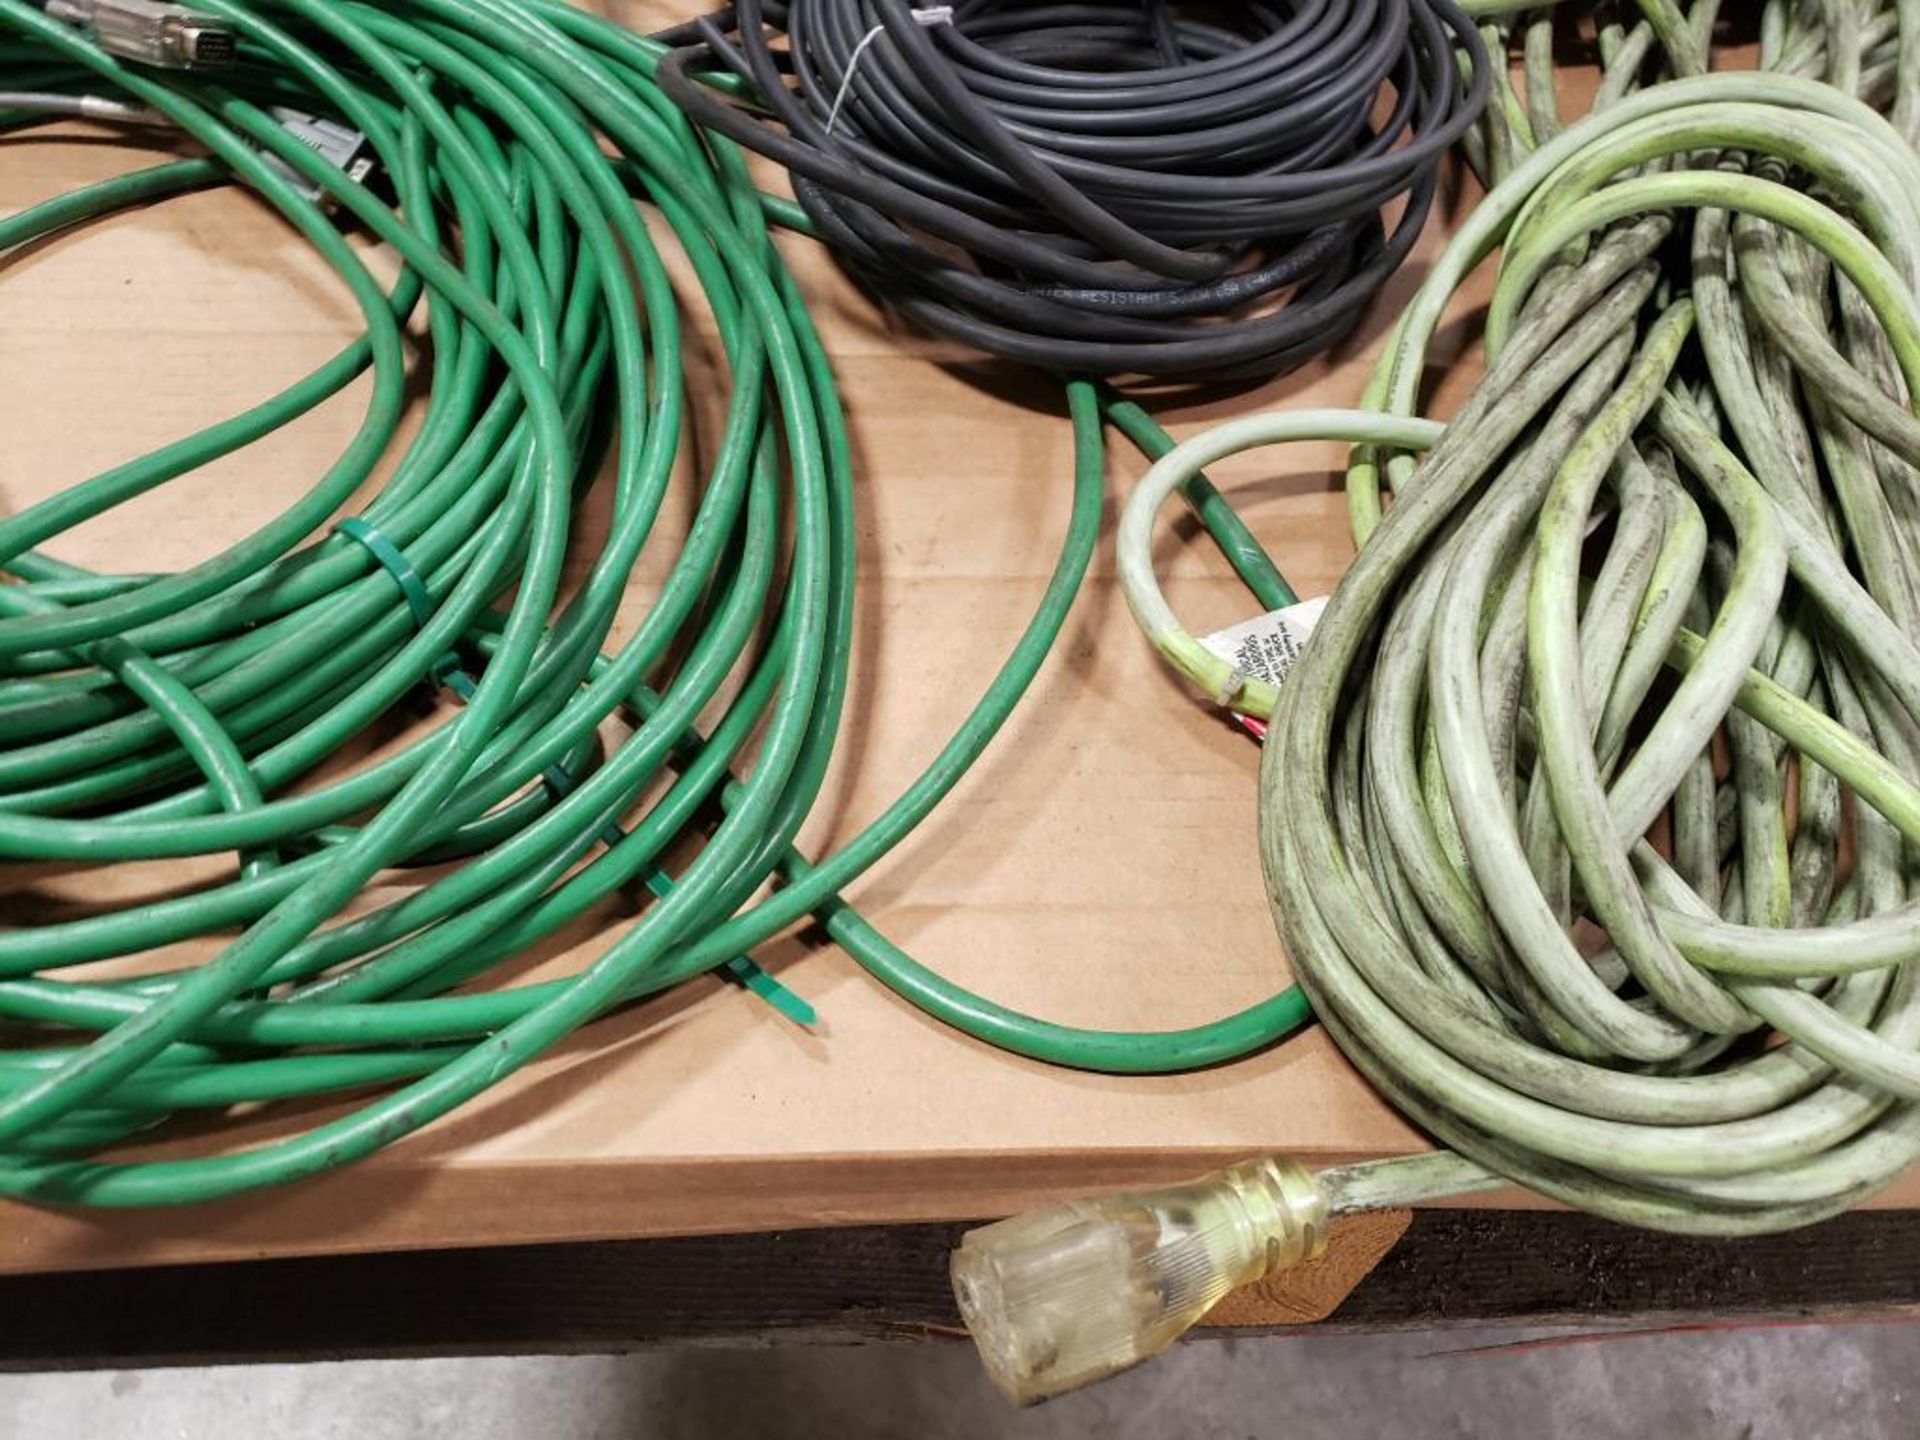 Pallet of assorted electrical connection wires. - Image 12 of 13